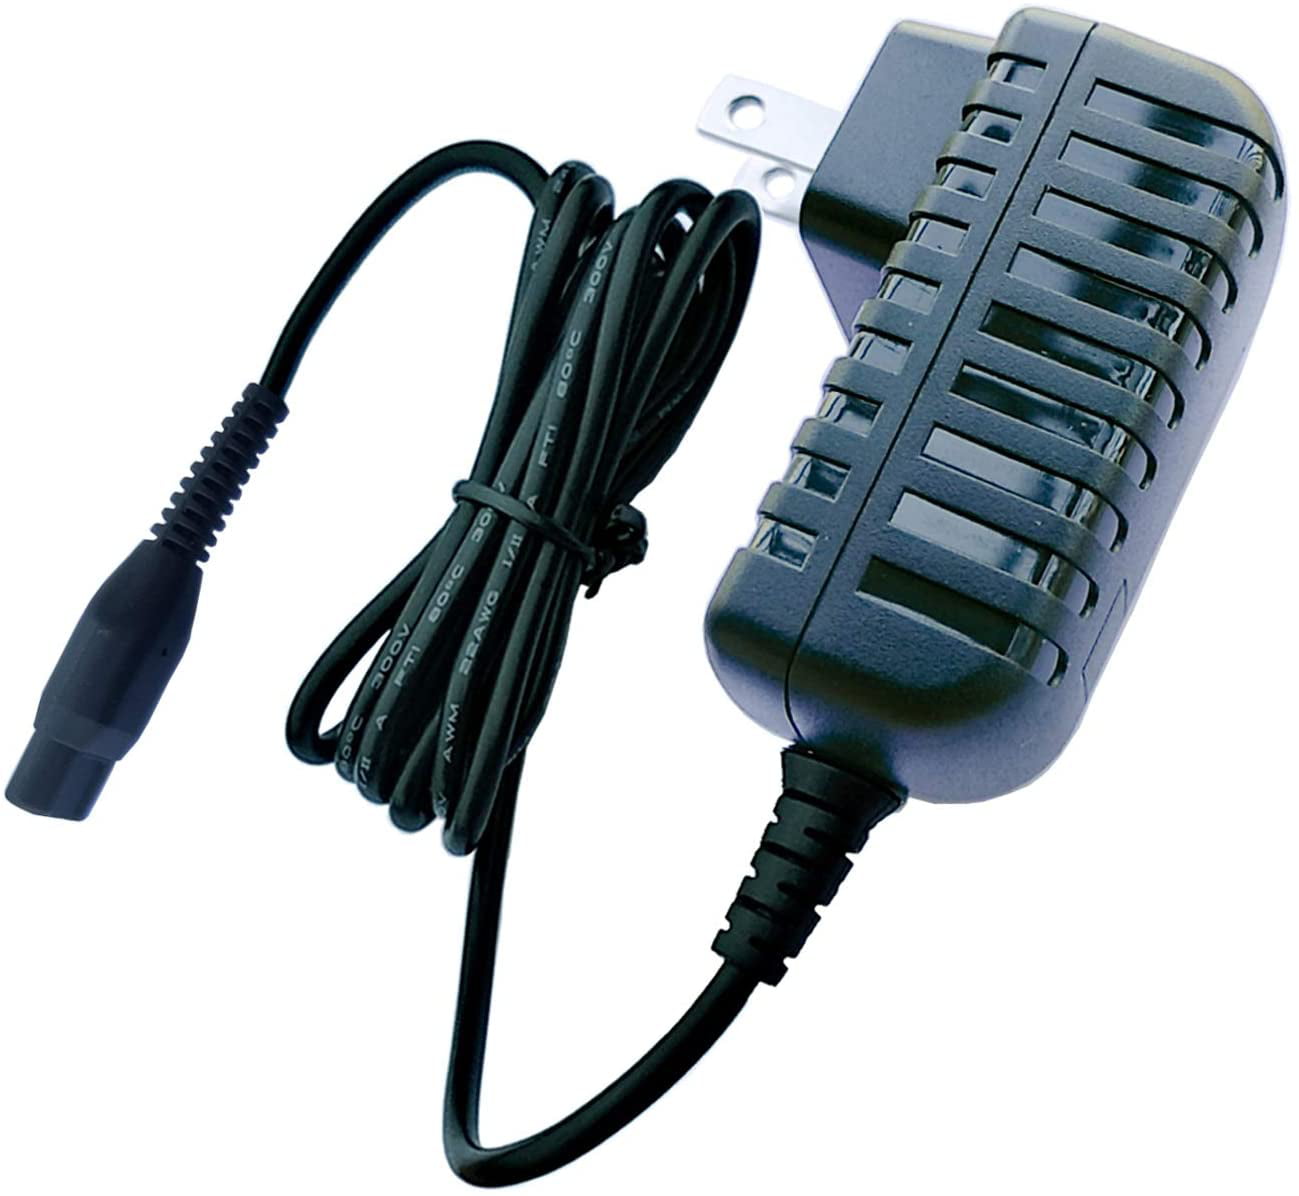 yan Power Supply Adapter Charger Cord for Philips QG3340 QG3340 Multigroom Grooming